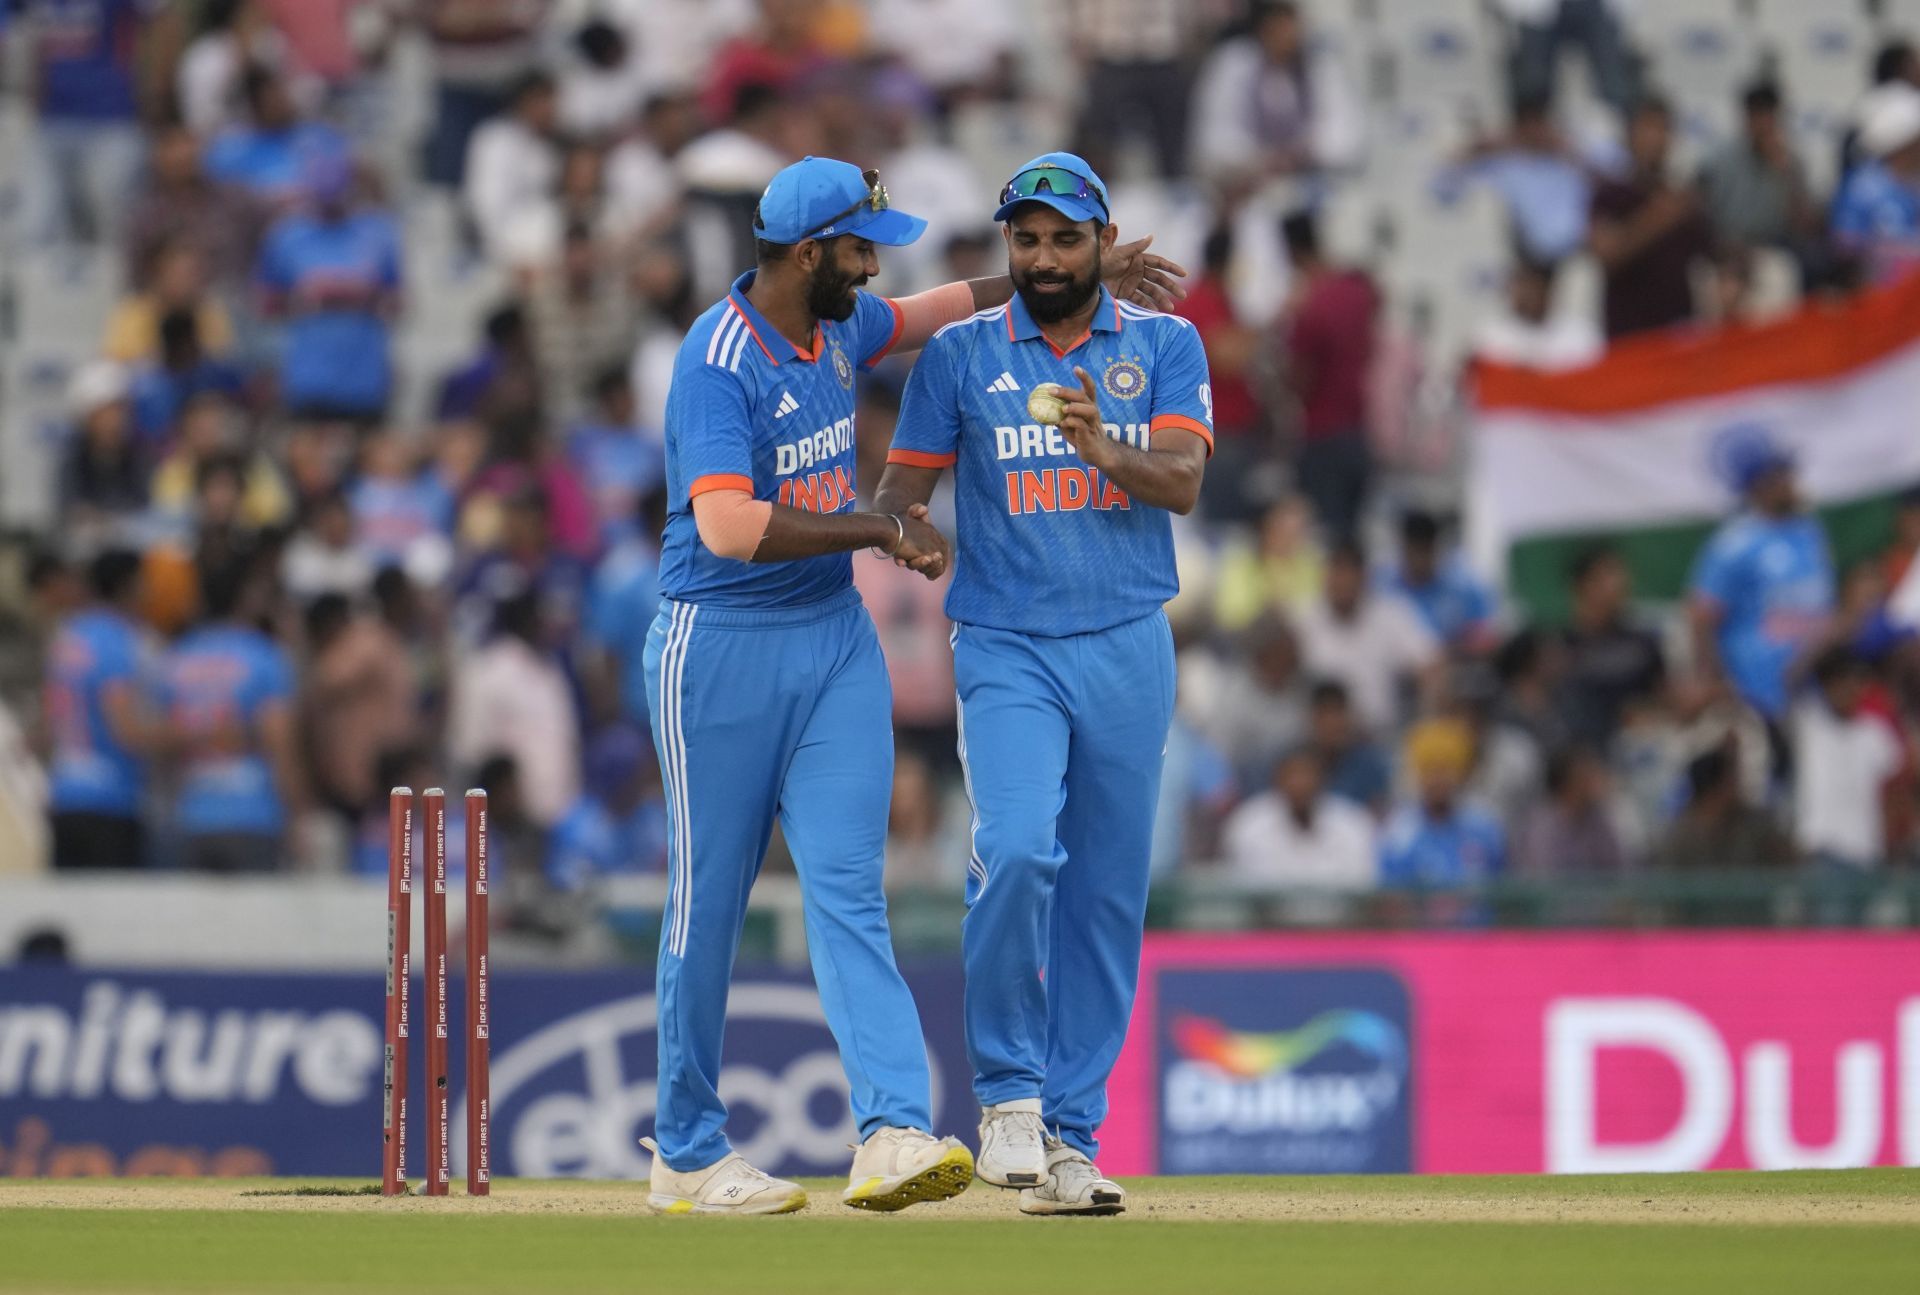 Bumrah, Shami, and Siraj can all play together